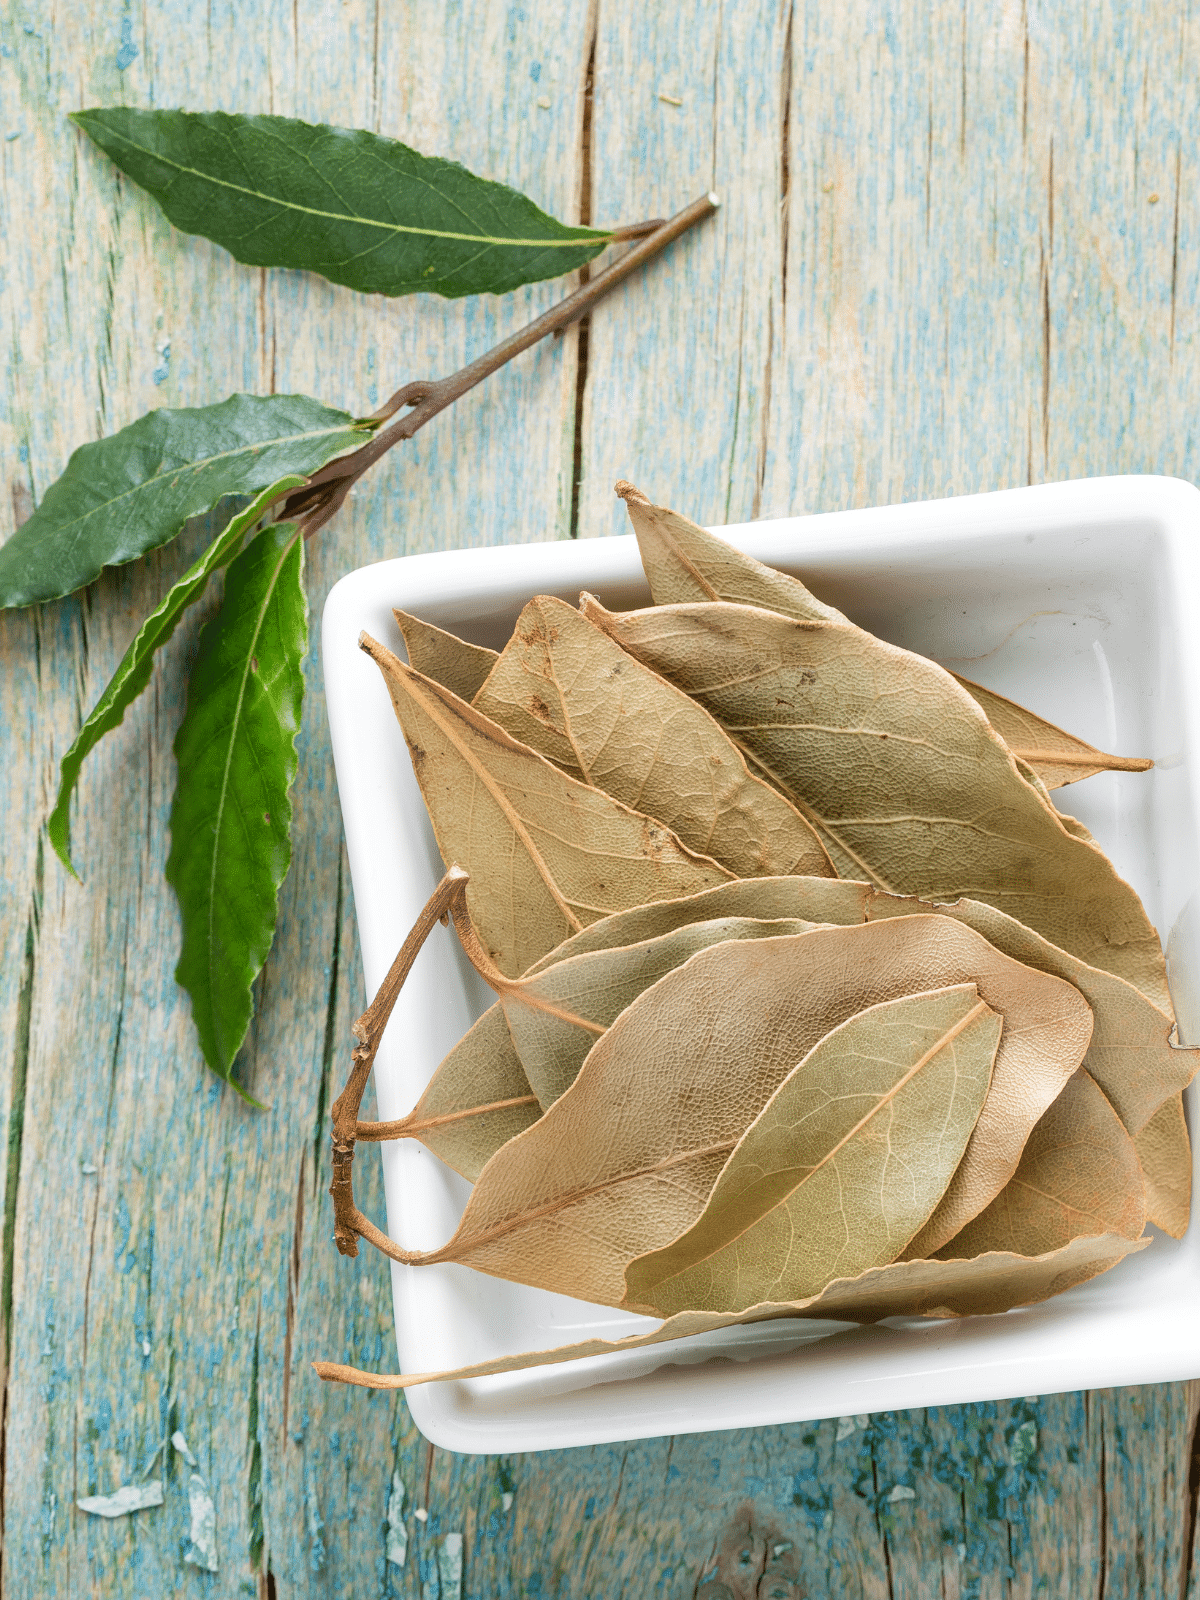 Dried bay leaves in a white bowl with fresh bay leaves on the side.